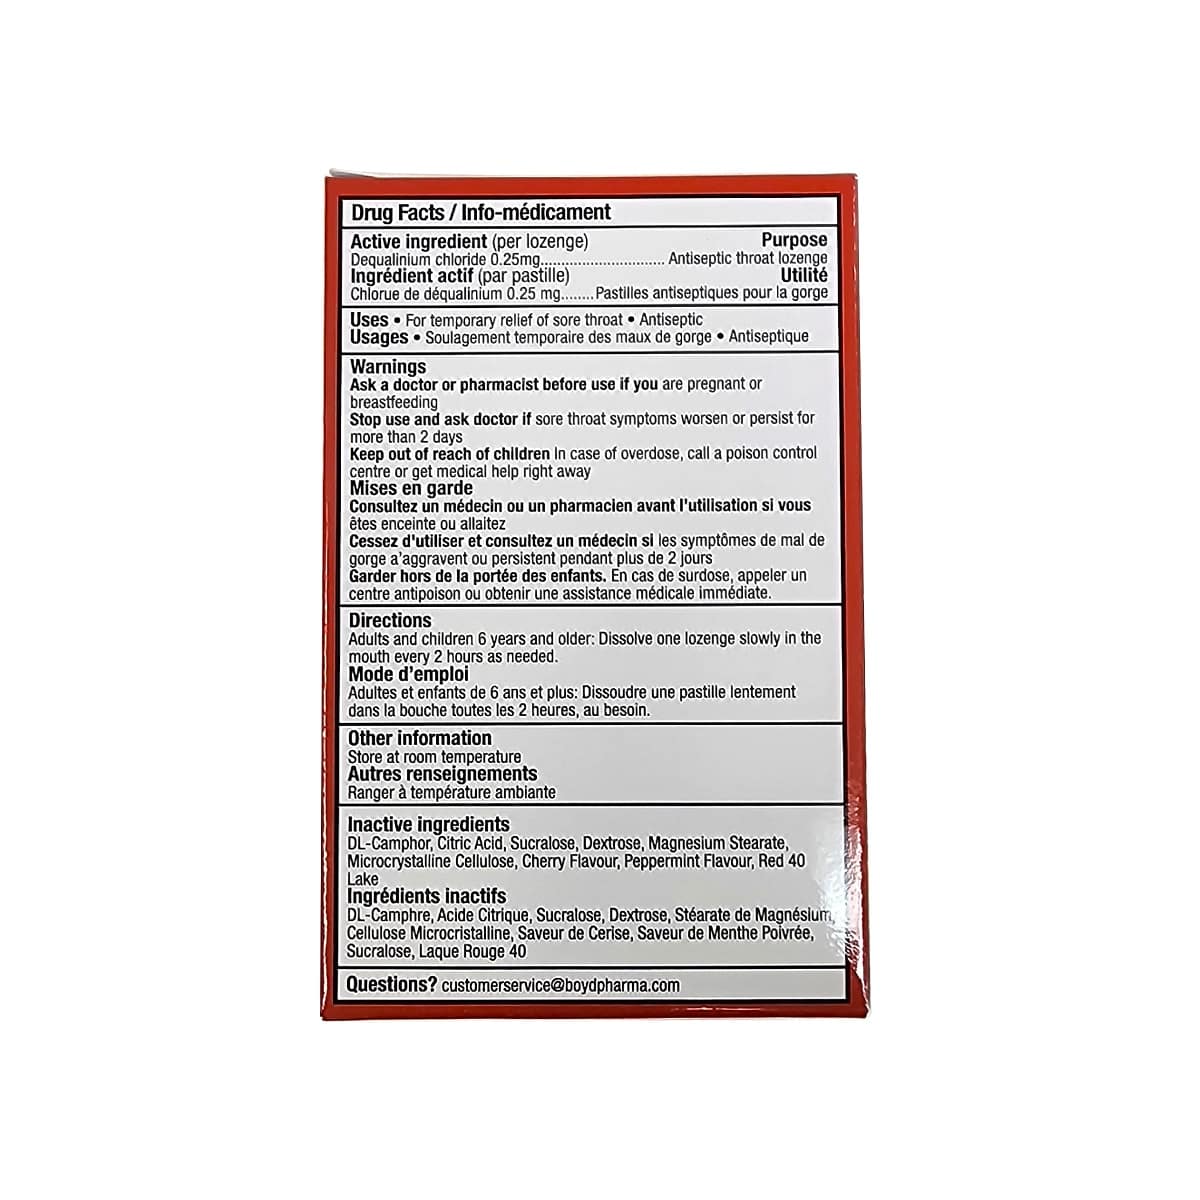 Ingredients, uses, warnings, directions for Dequadin Dequalinium Chloride Lozenges Cherry Flavour (16 lozenges)